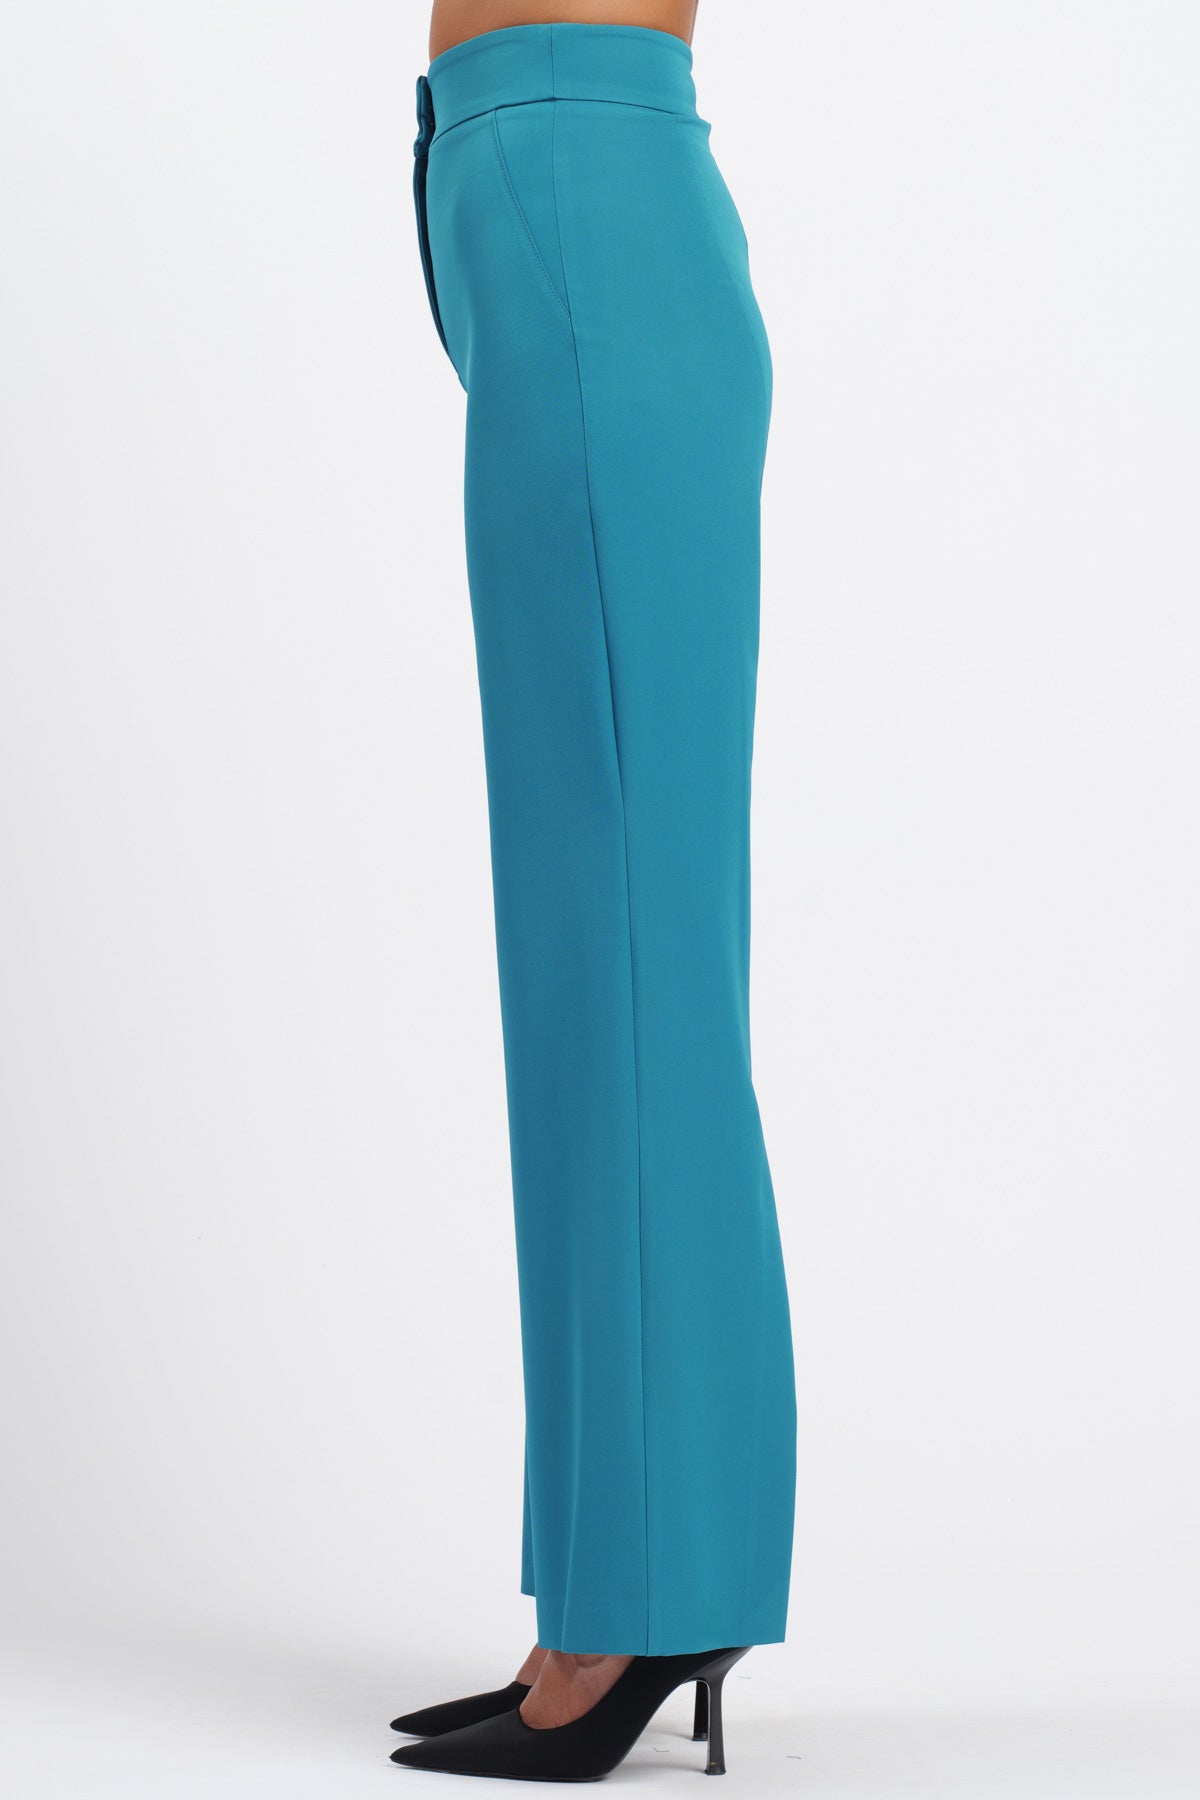 Peacock Spacchi Palazzo Trousers